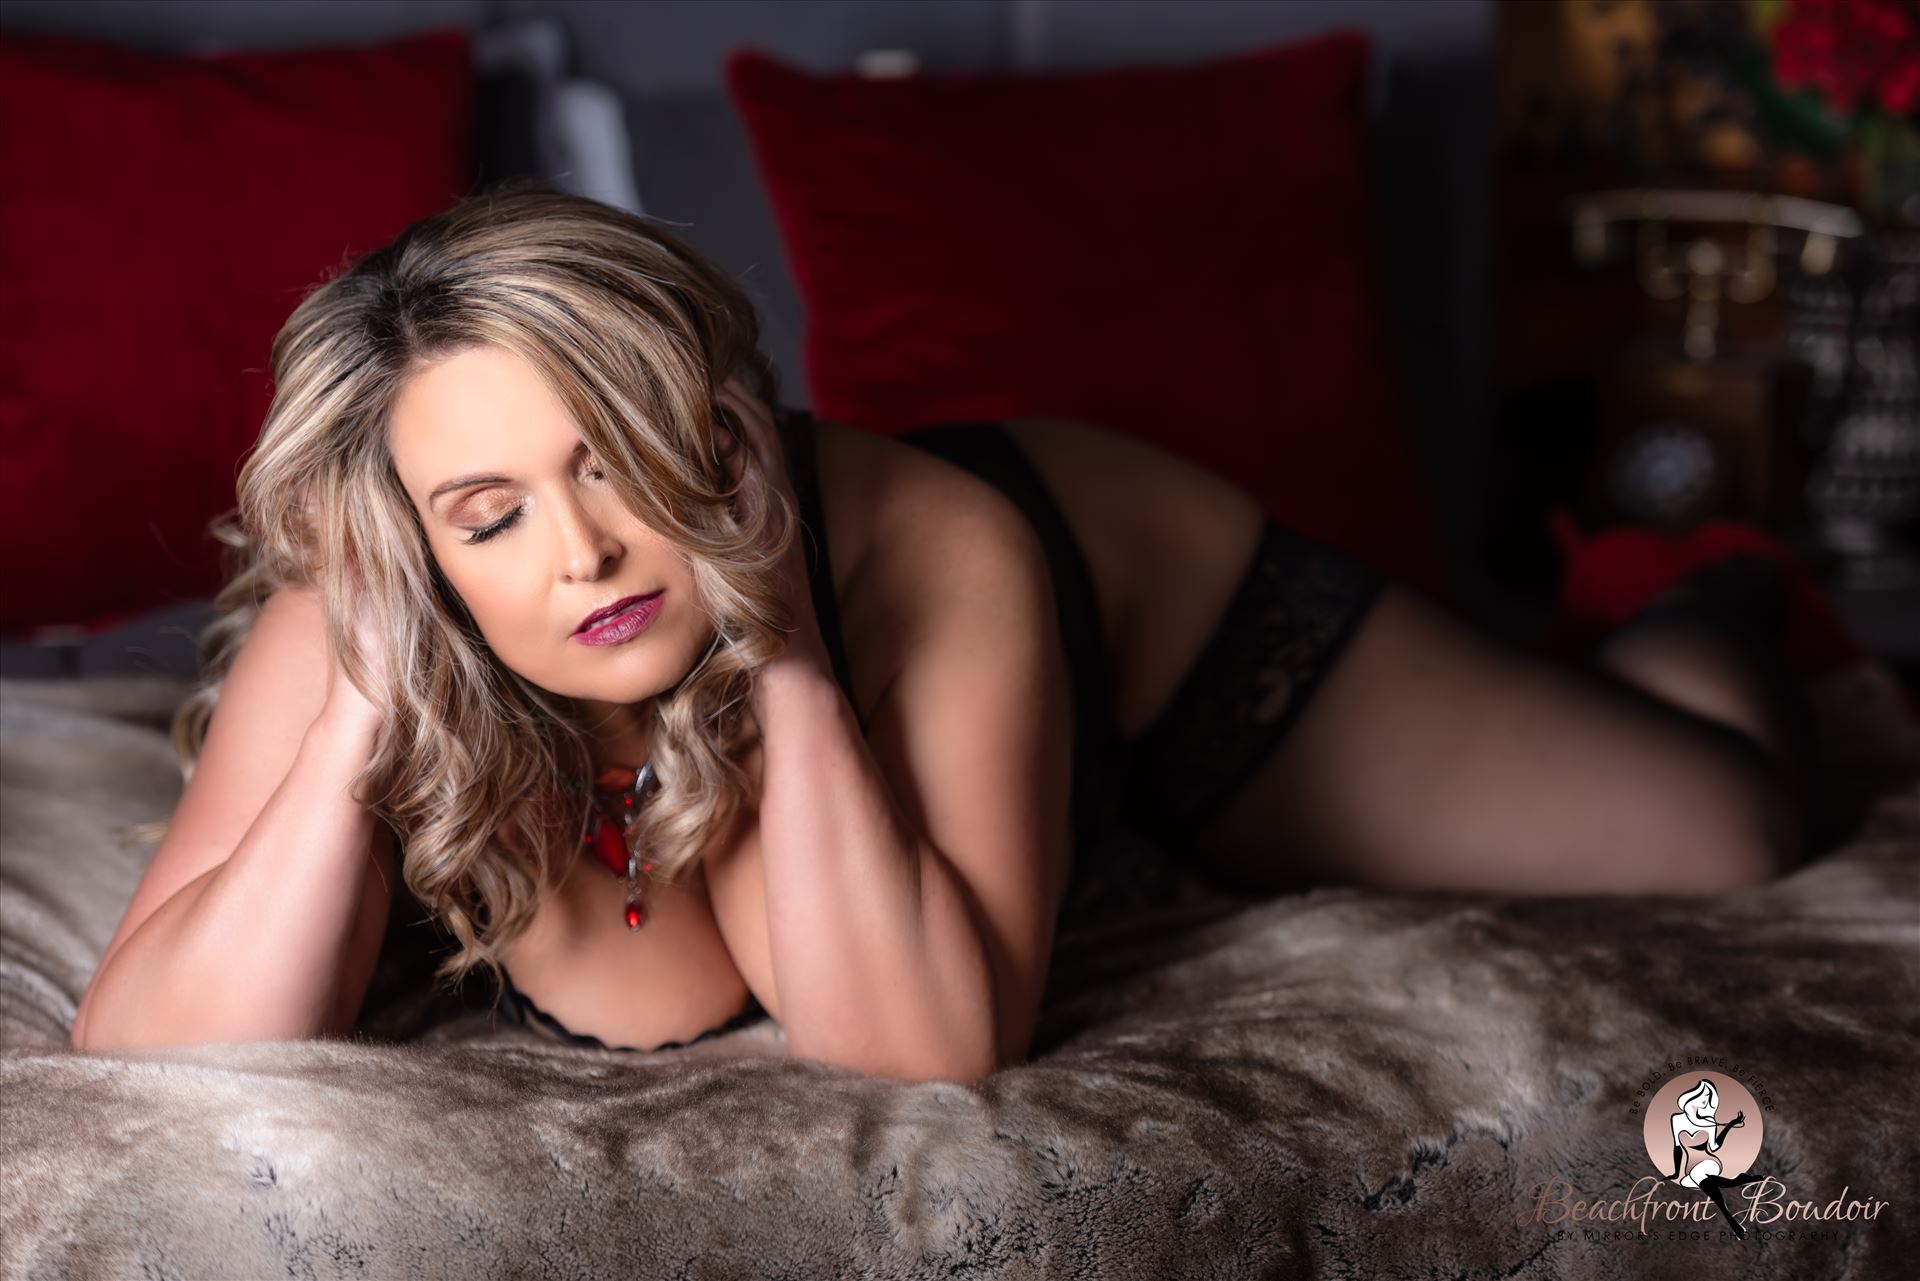 Port-2145.JPG - Beachfront Boudoir by Mirror's Edge Photography is a Boutique Luxury Boudoir Photography Studio located just blocks from the beach in Oceano, California. My mission is to show as many women as possible how beautiful they truly are! by Sarah Williams